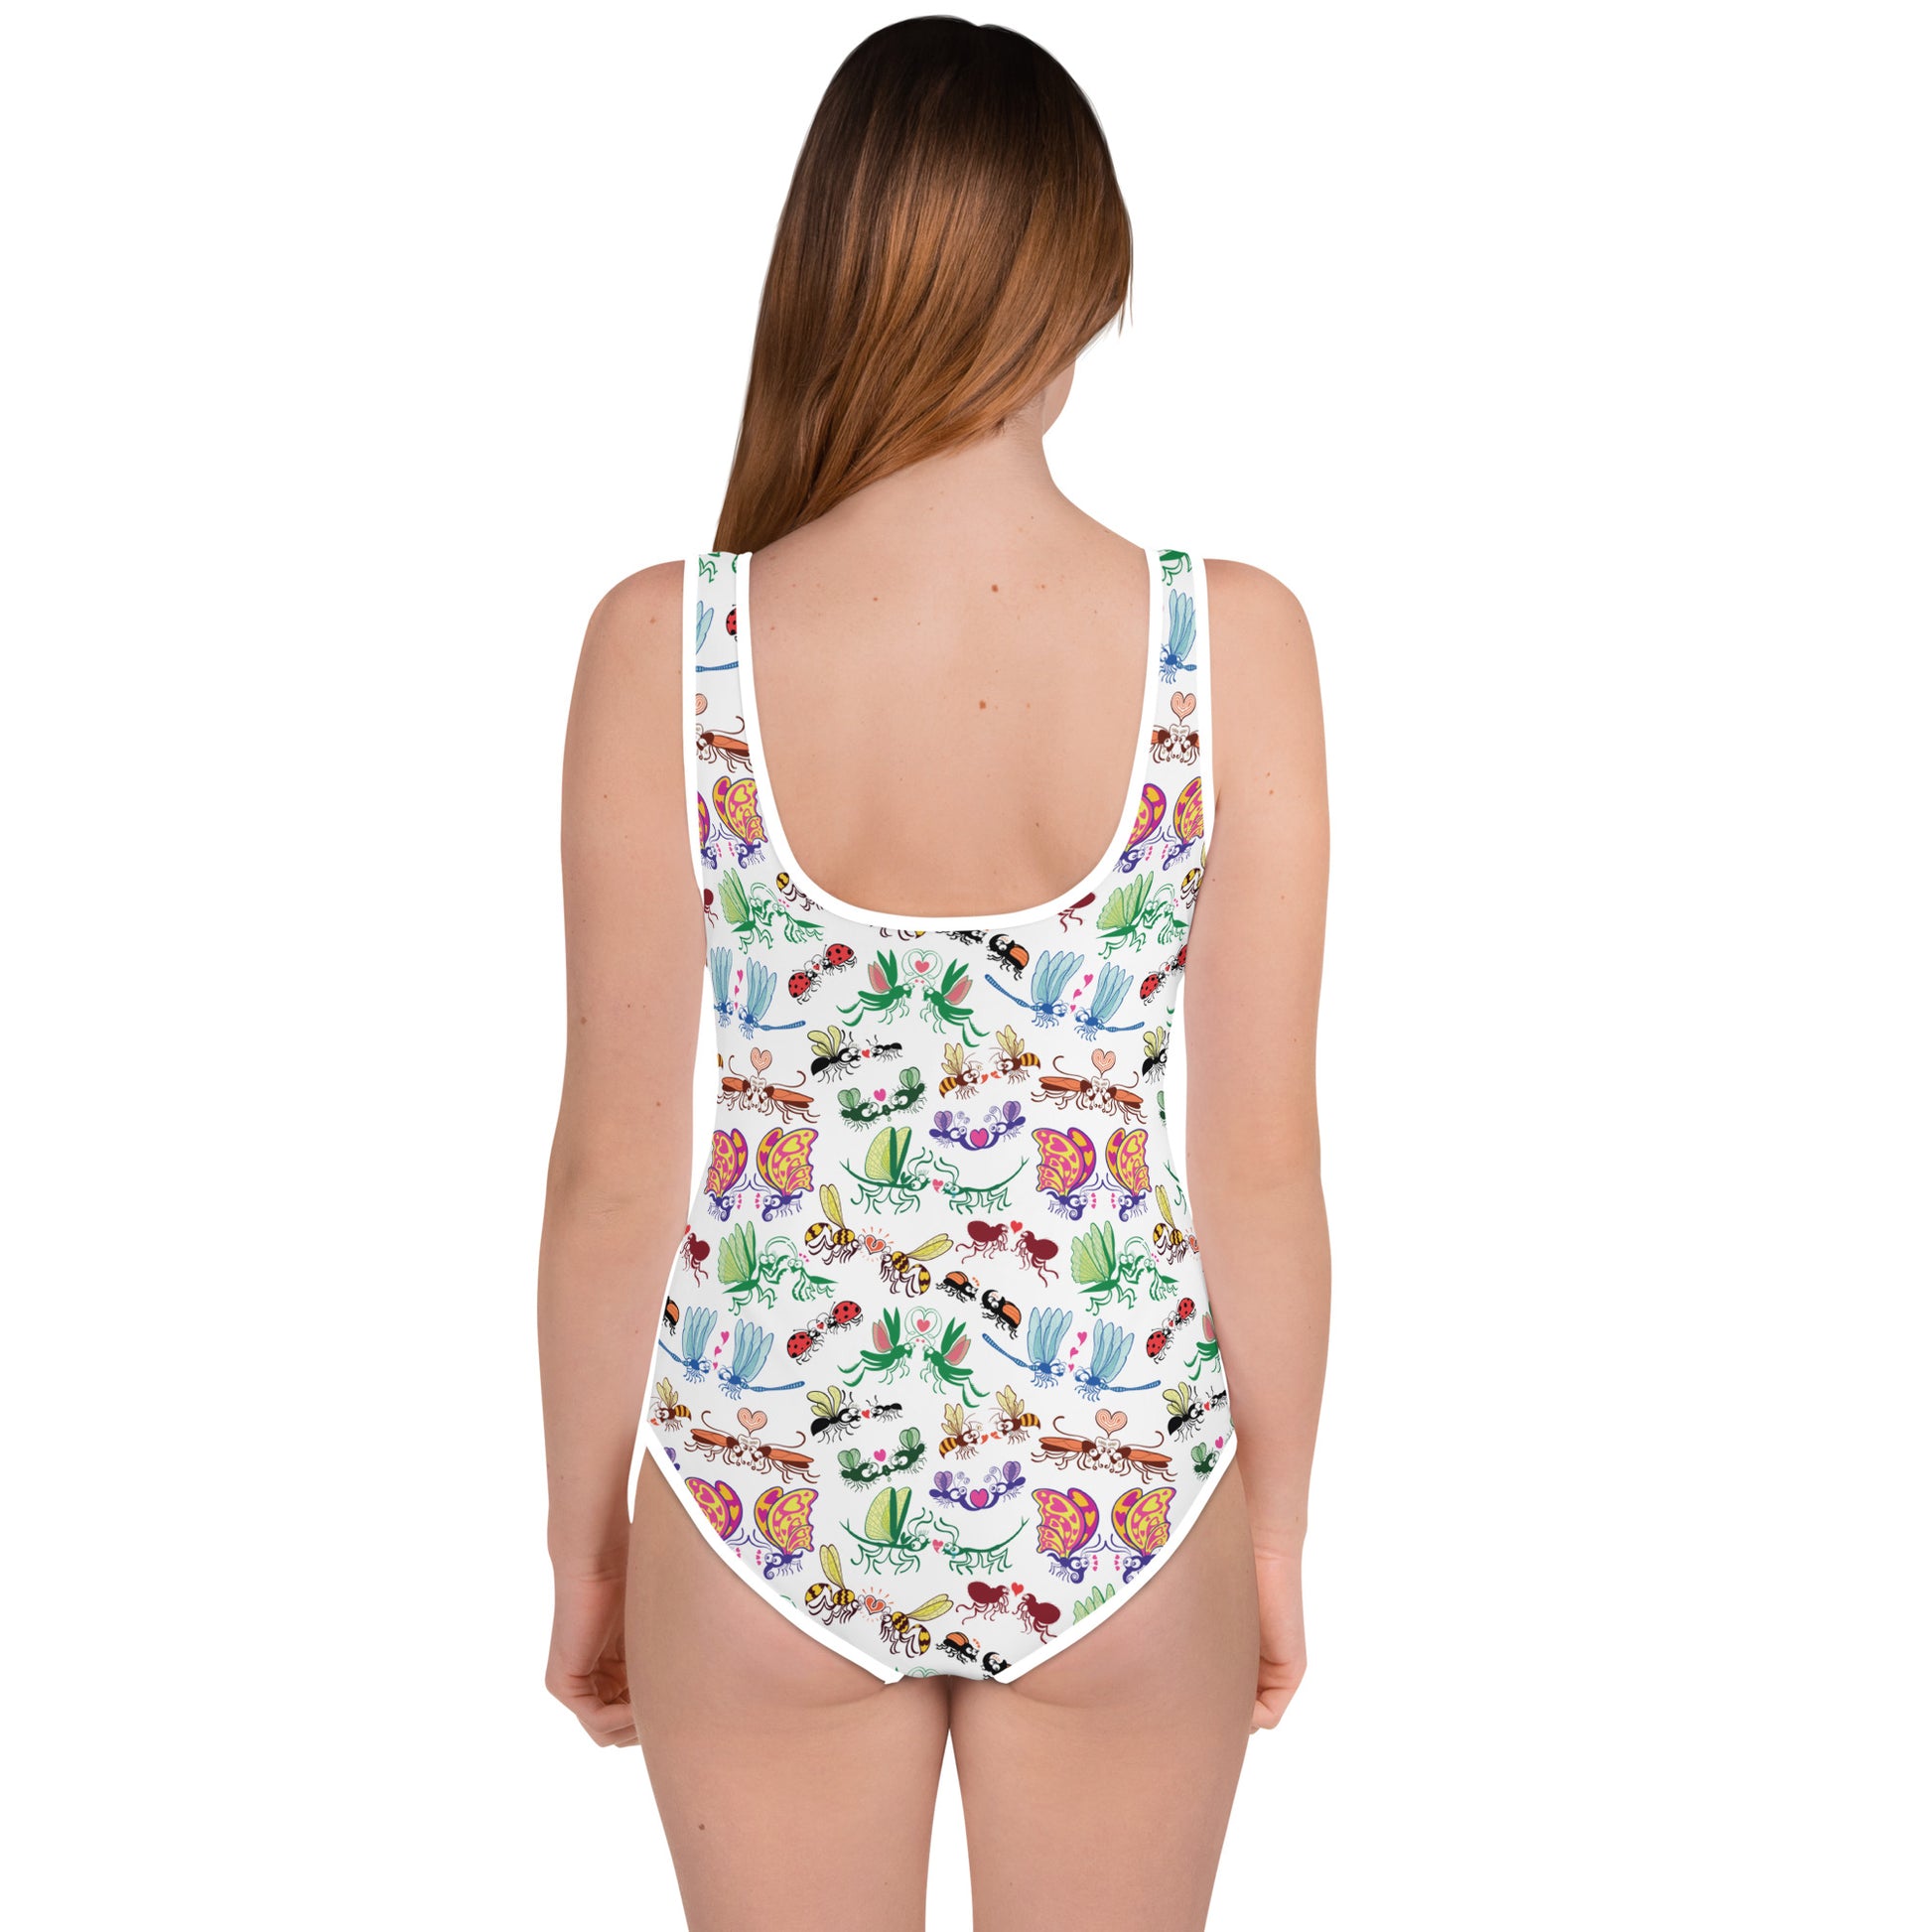 Cool insects madly in love All-Over Print Youth Swimsuit. Back view